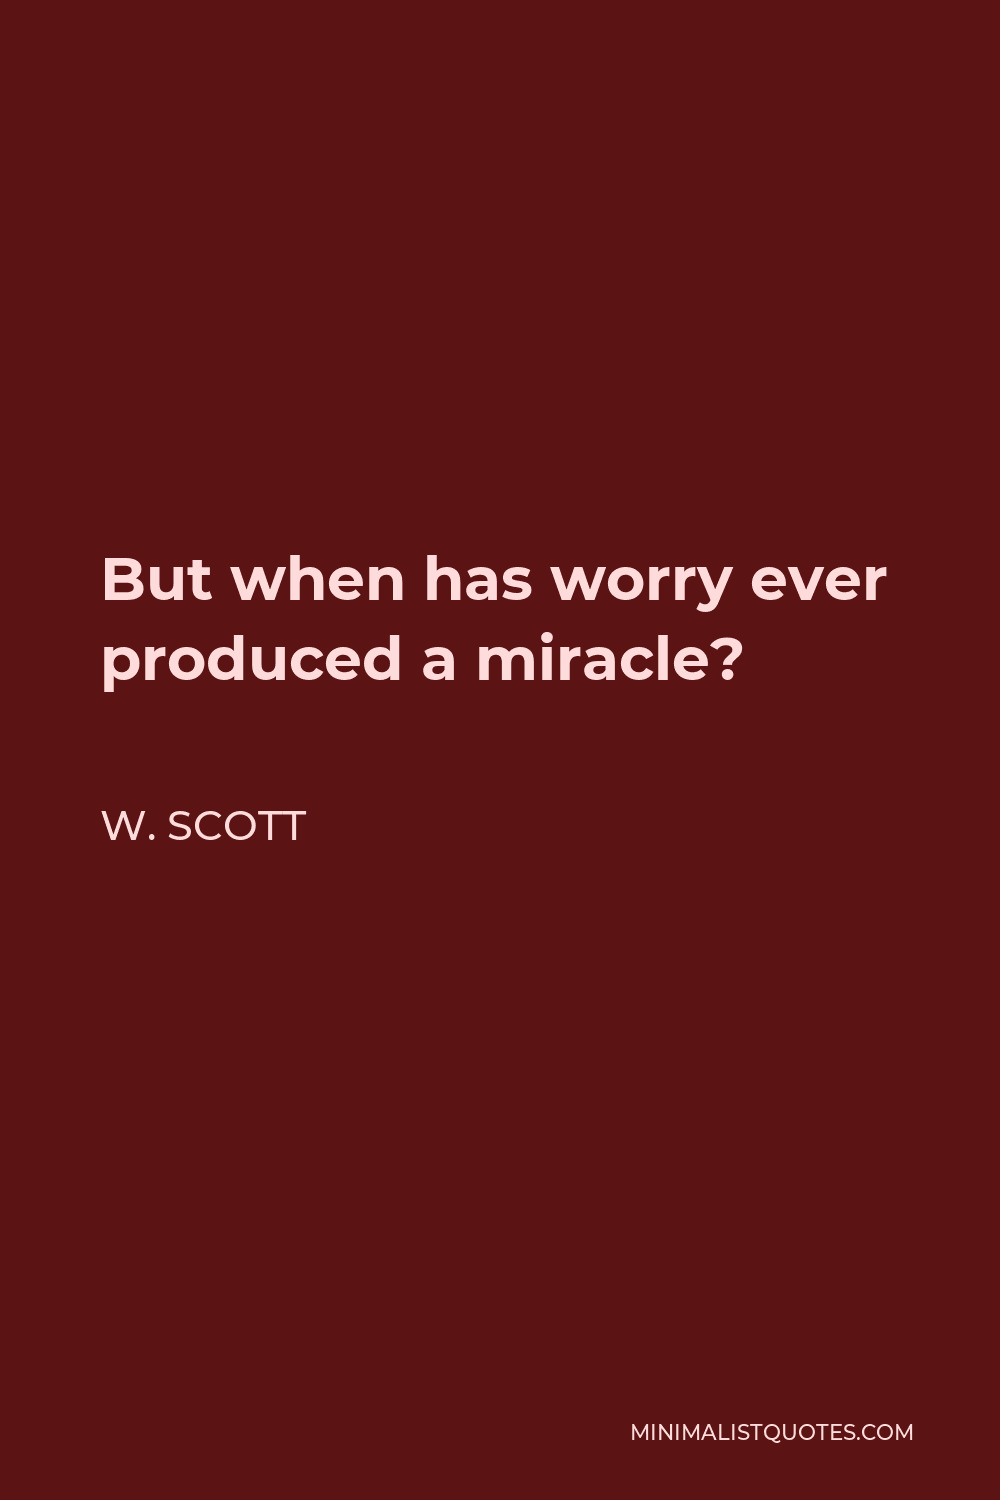 W. Scott Quote - But when has worry ever produced a miracle?